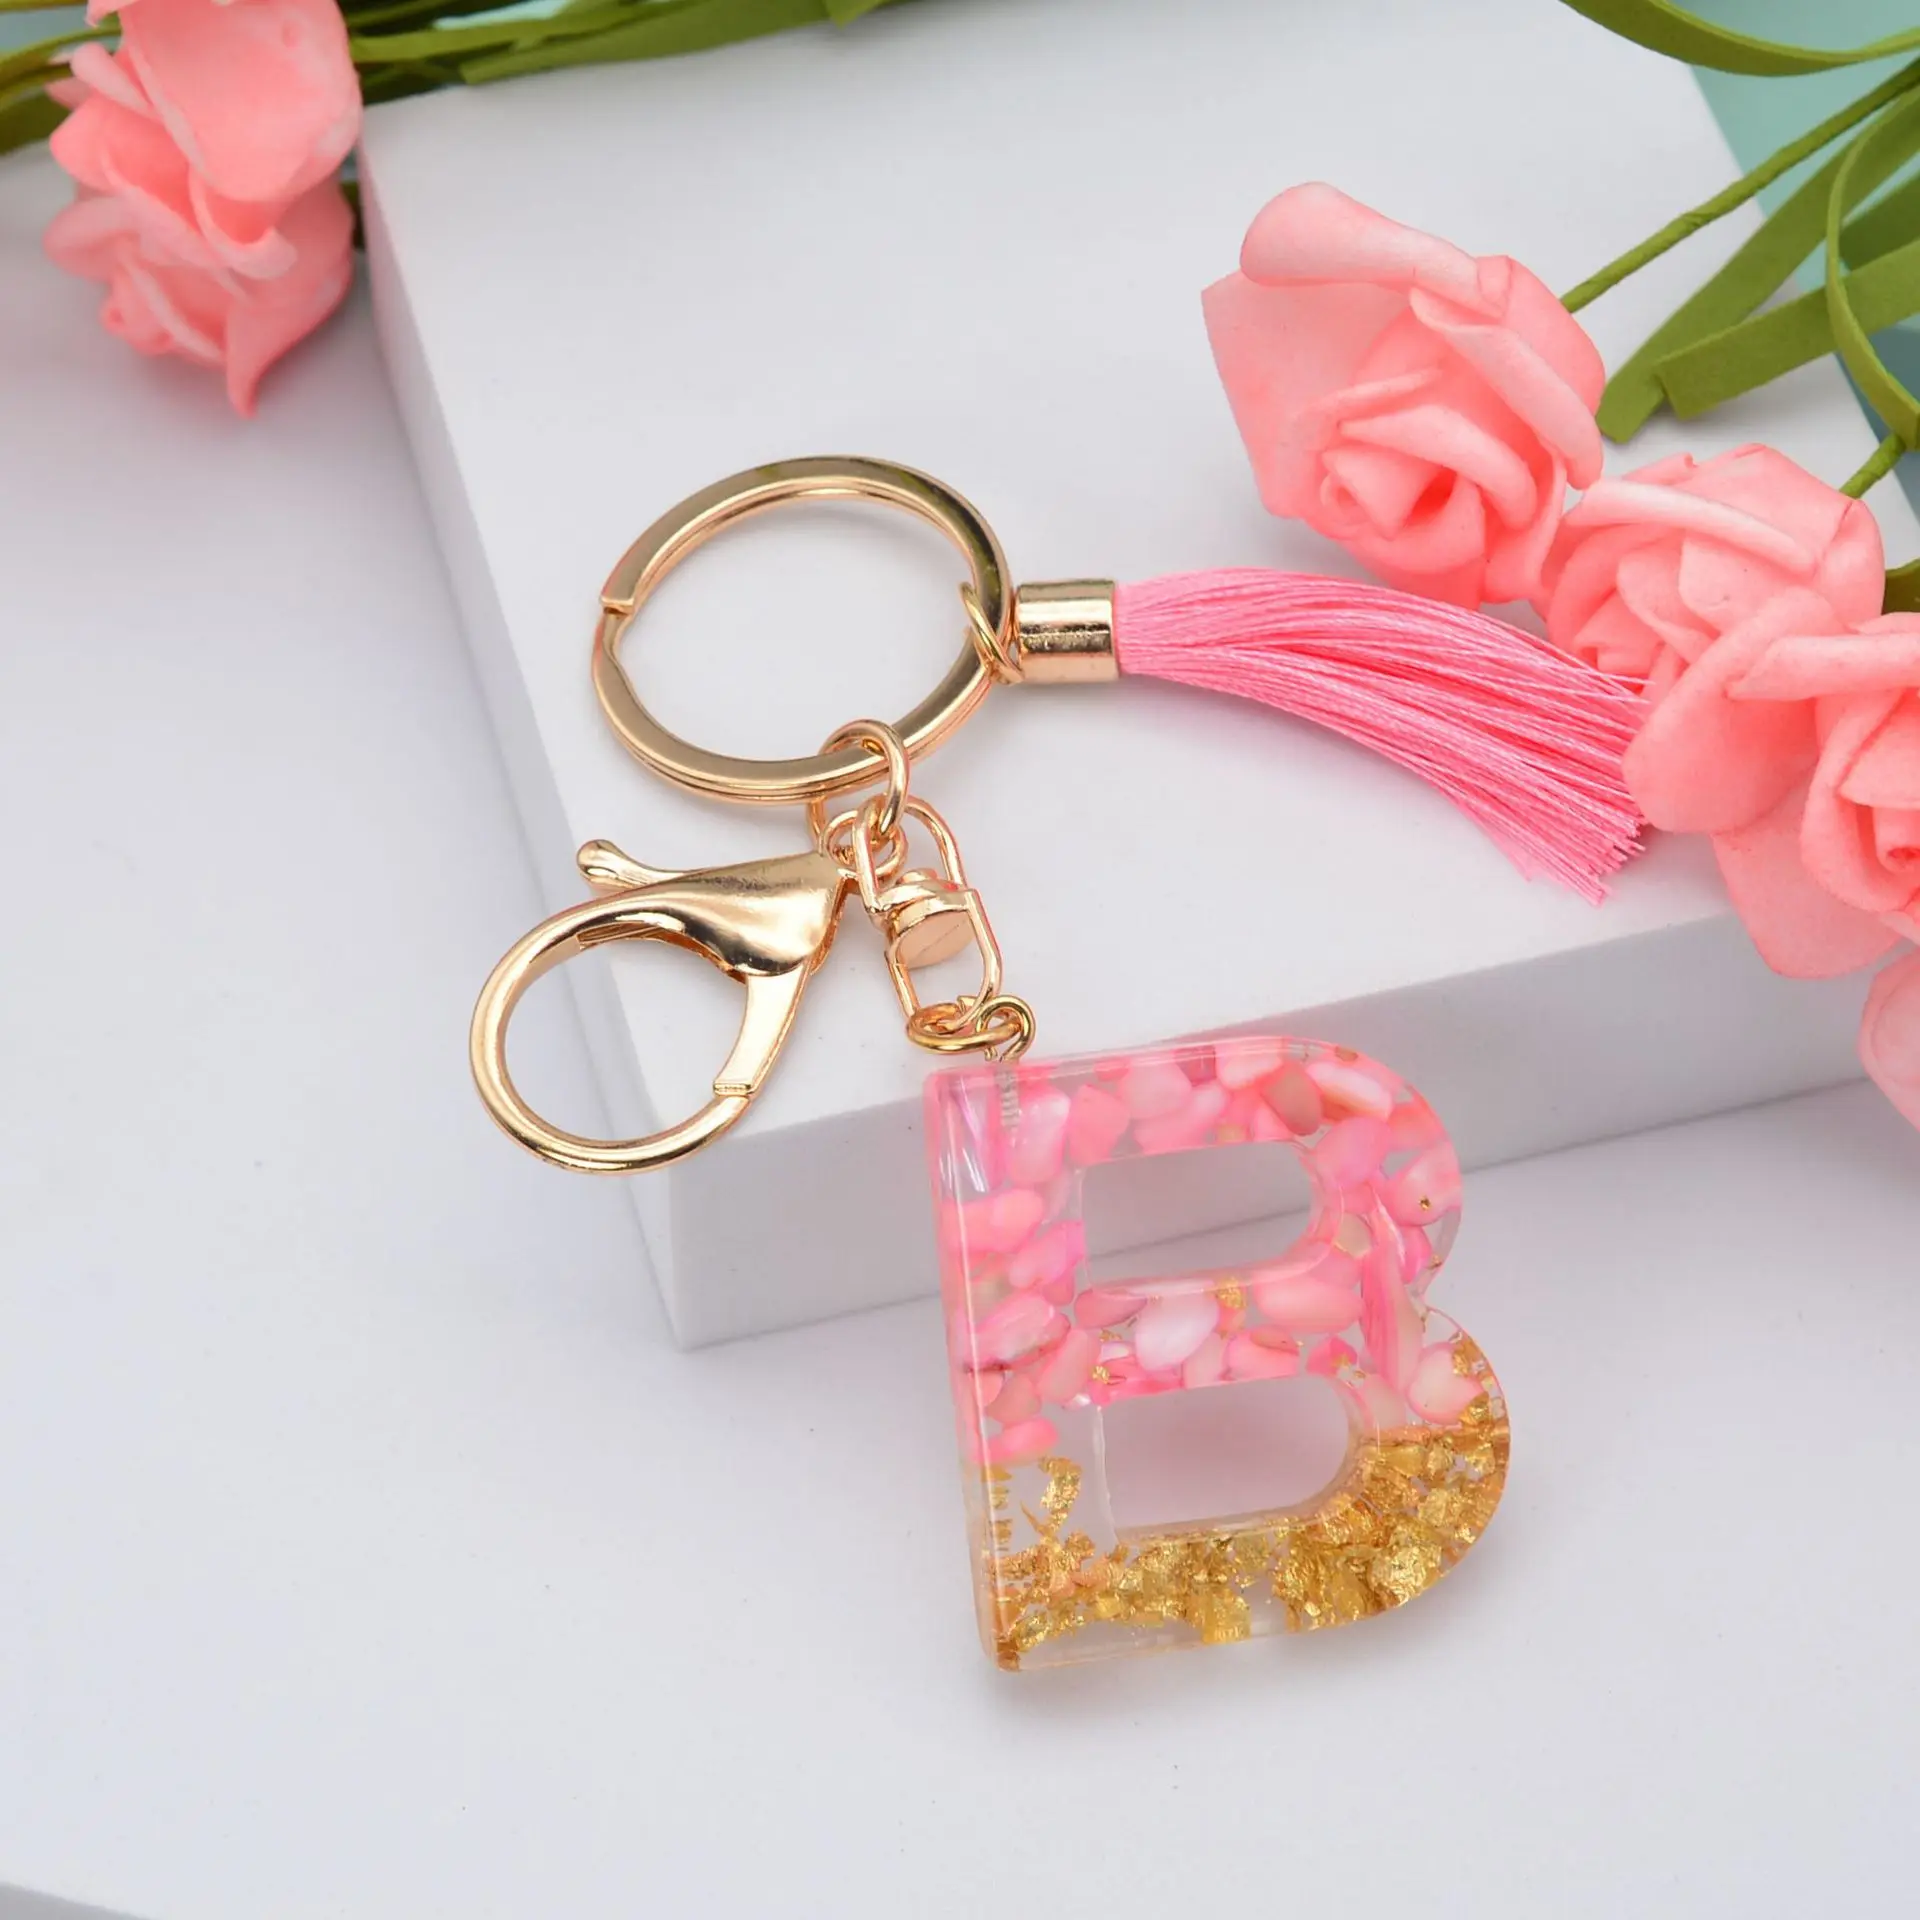 Accessories  Sparkly Rose Keychain Bag Charm New In Packaging